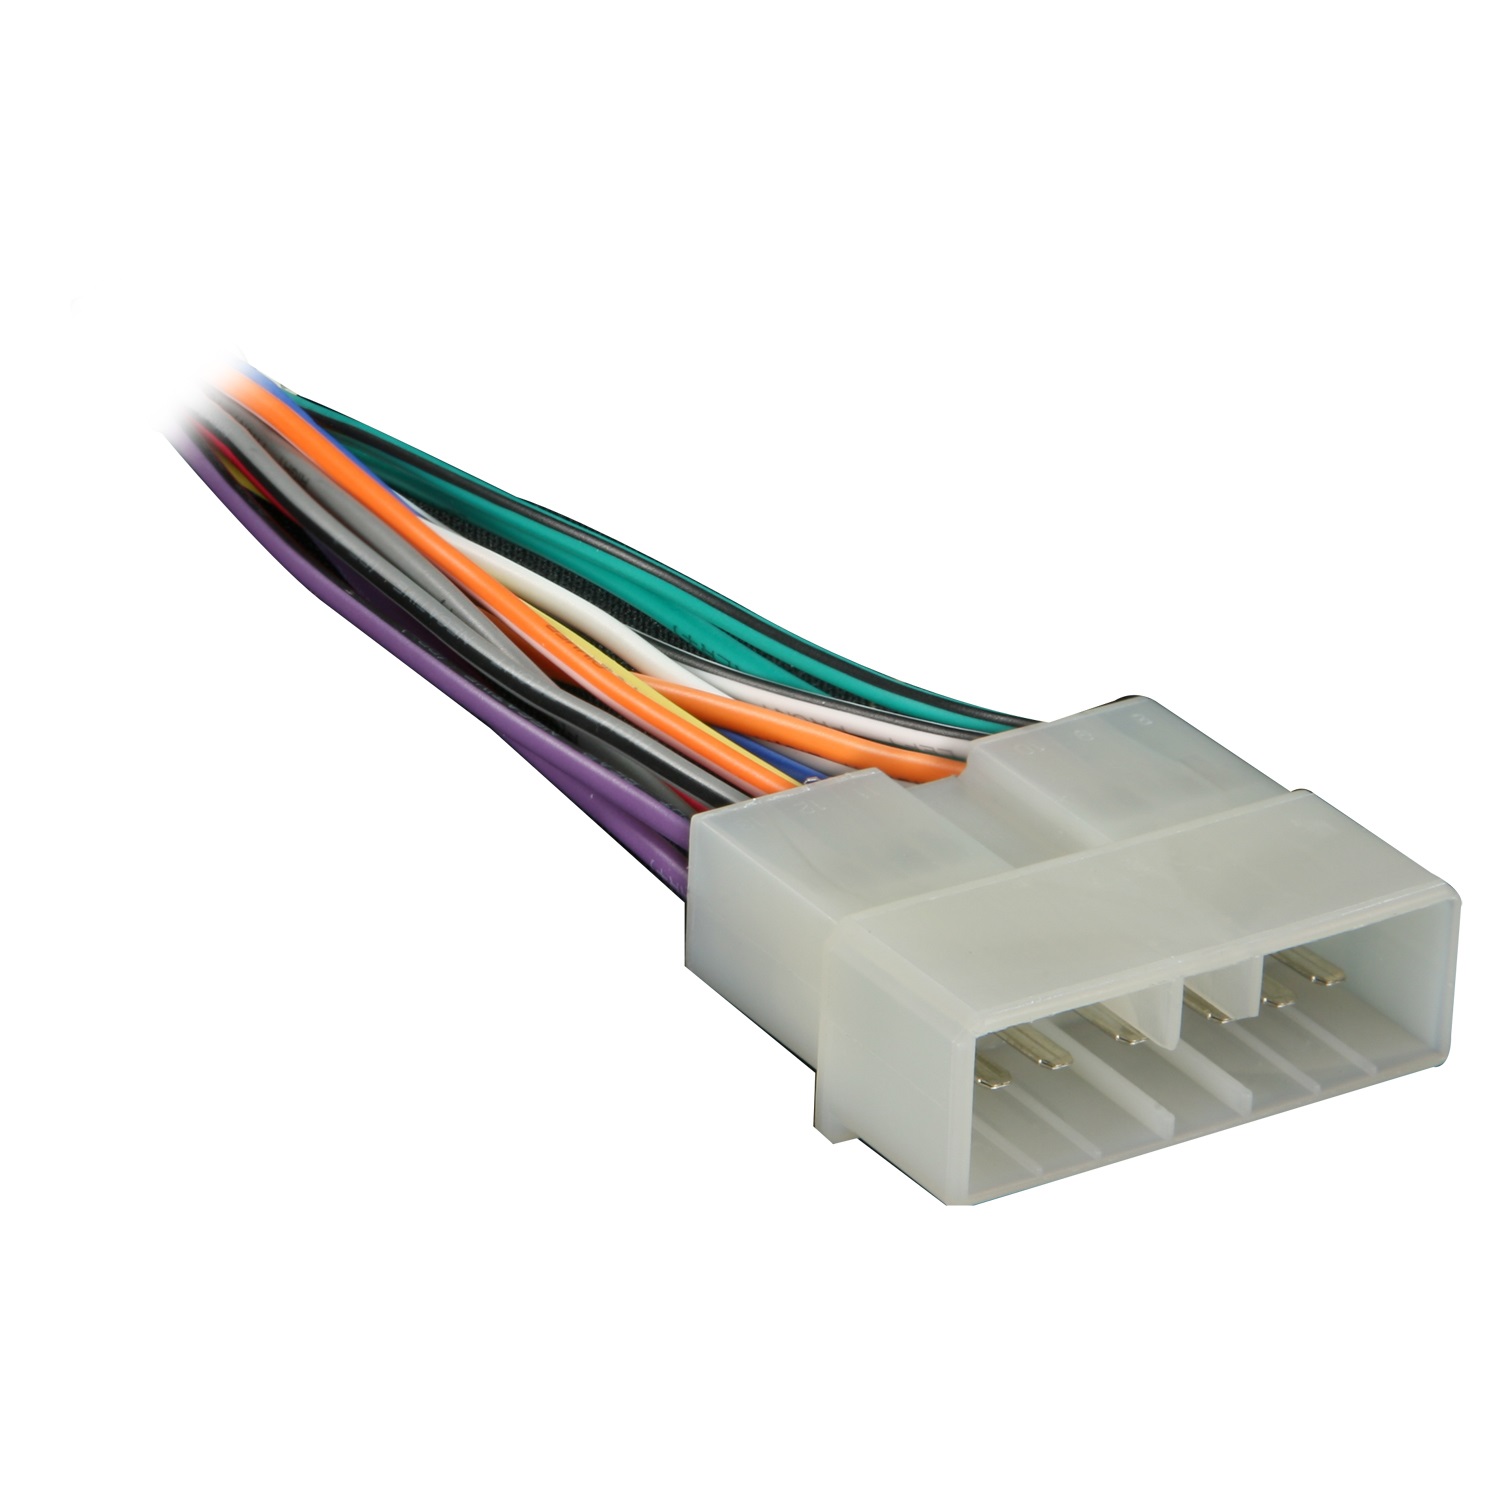 Metra Metra 70-1002 TURBOWire; Wire Harness